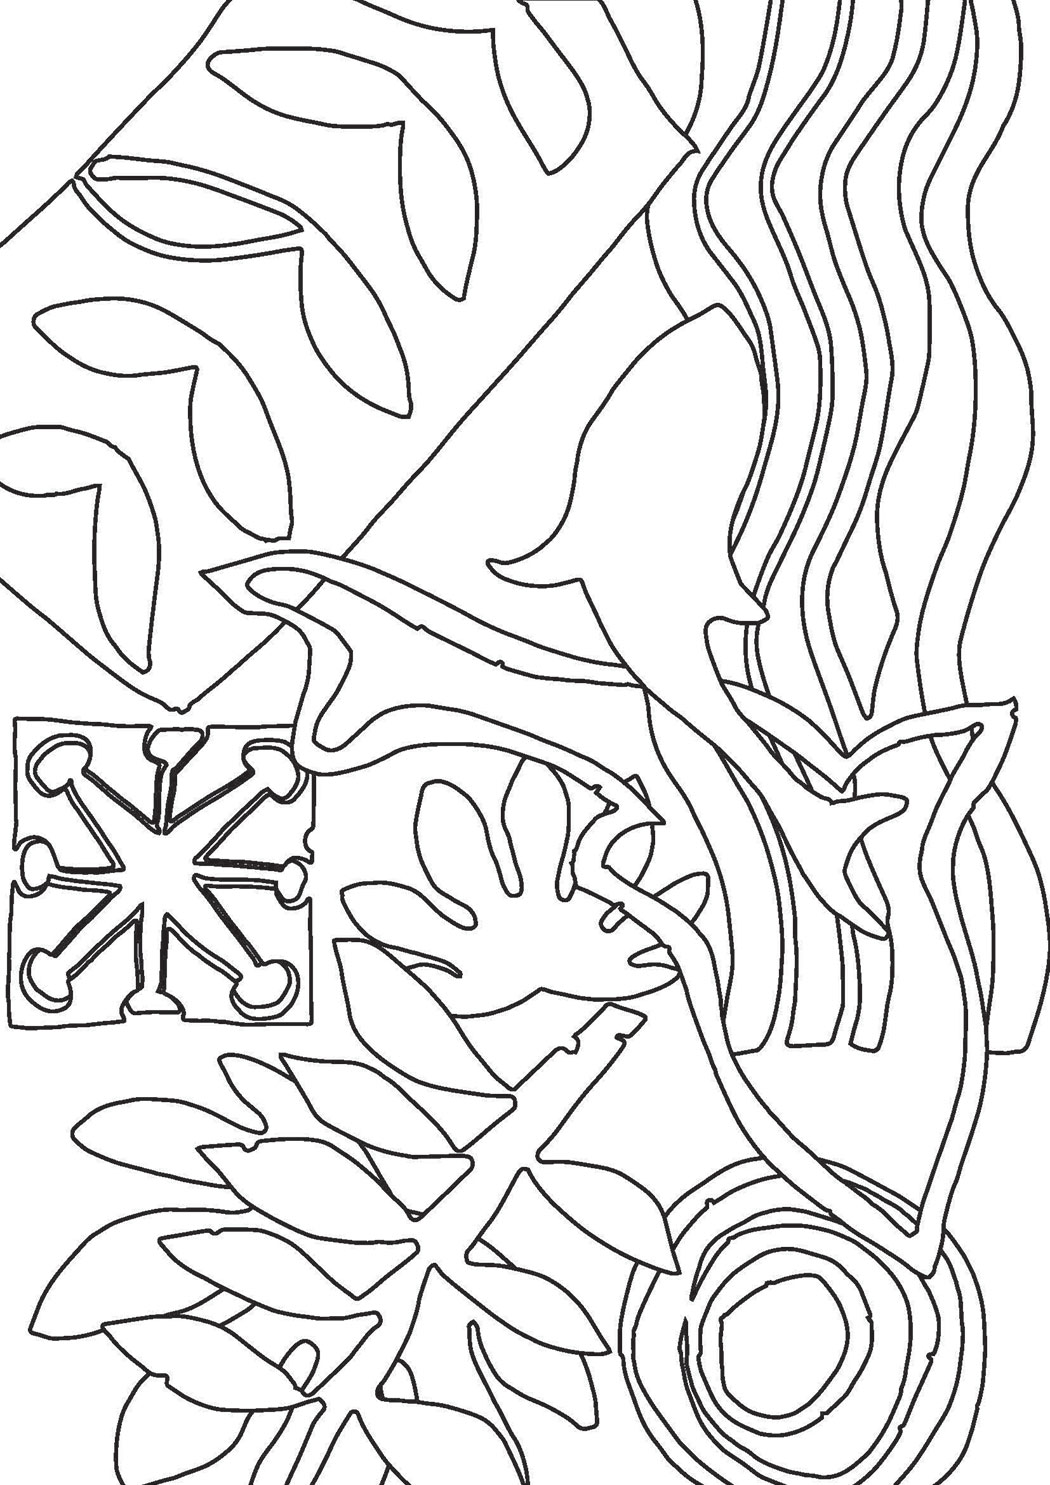 Download Matisse inspired colouring | ArtCare